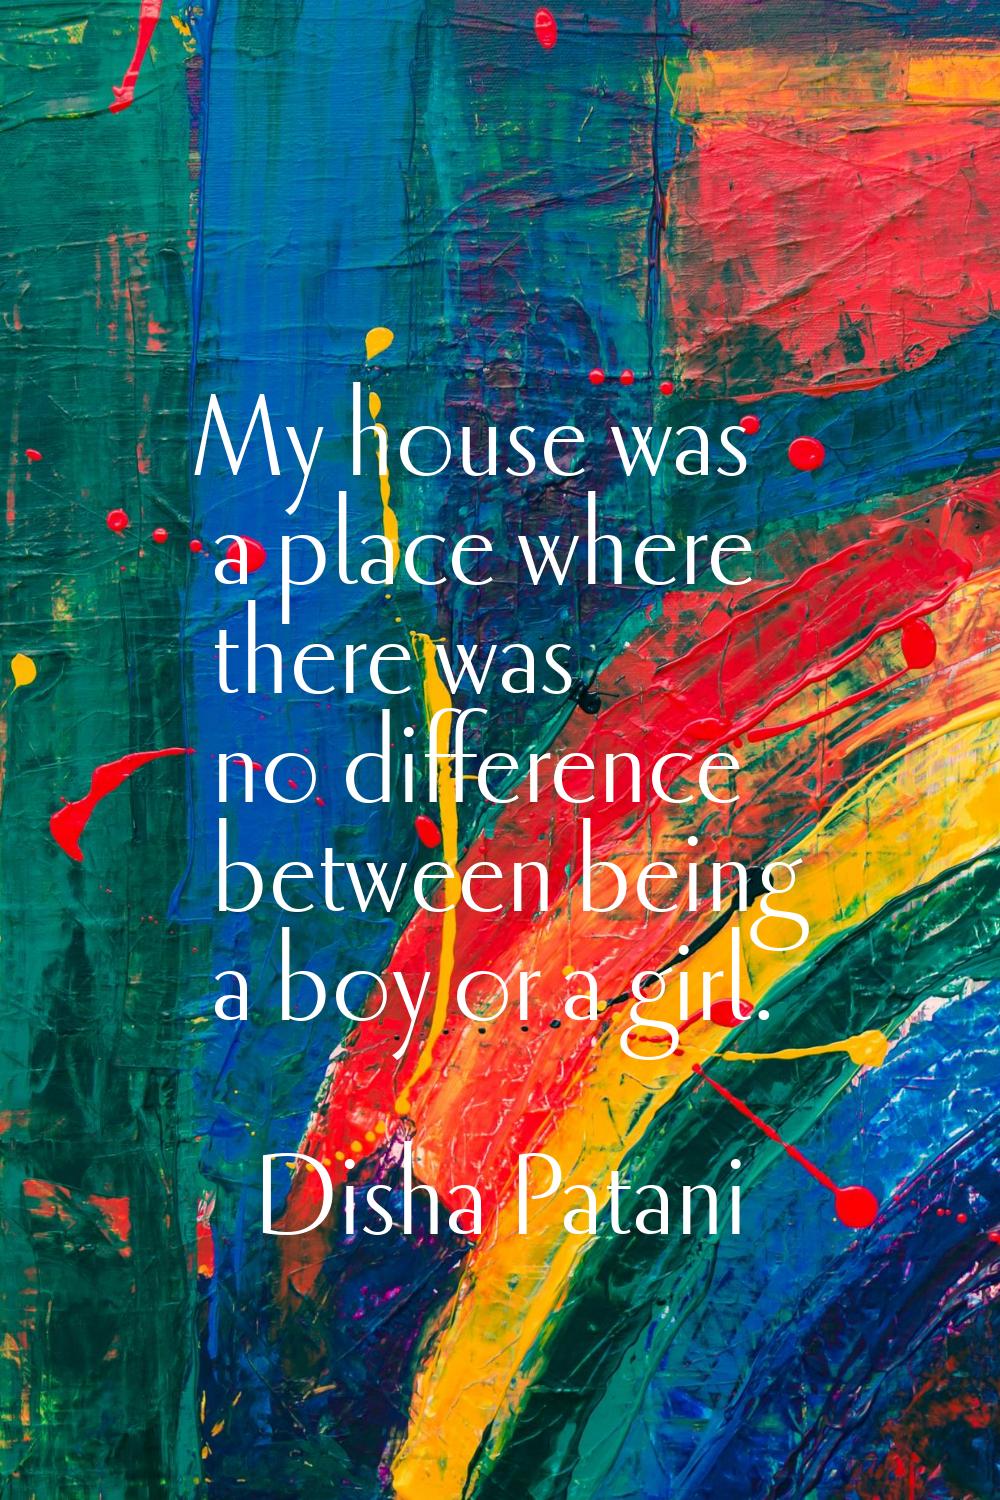 My house was a place where there was no difference between being a boy or a girl.